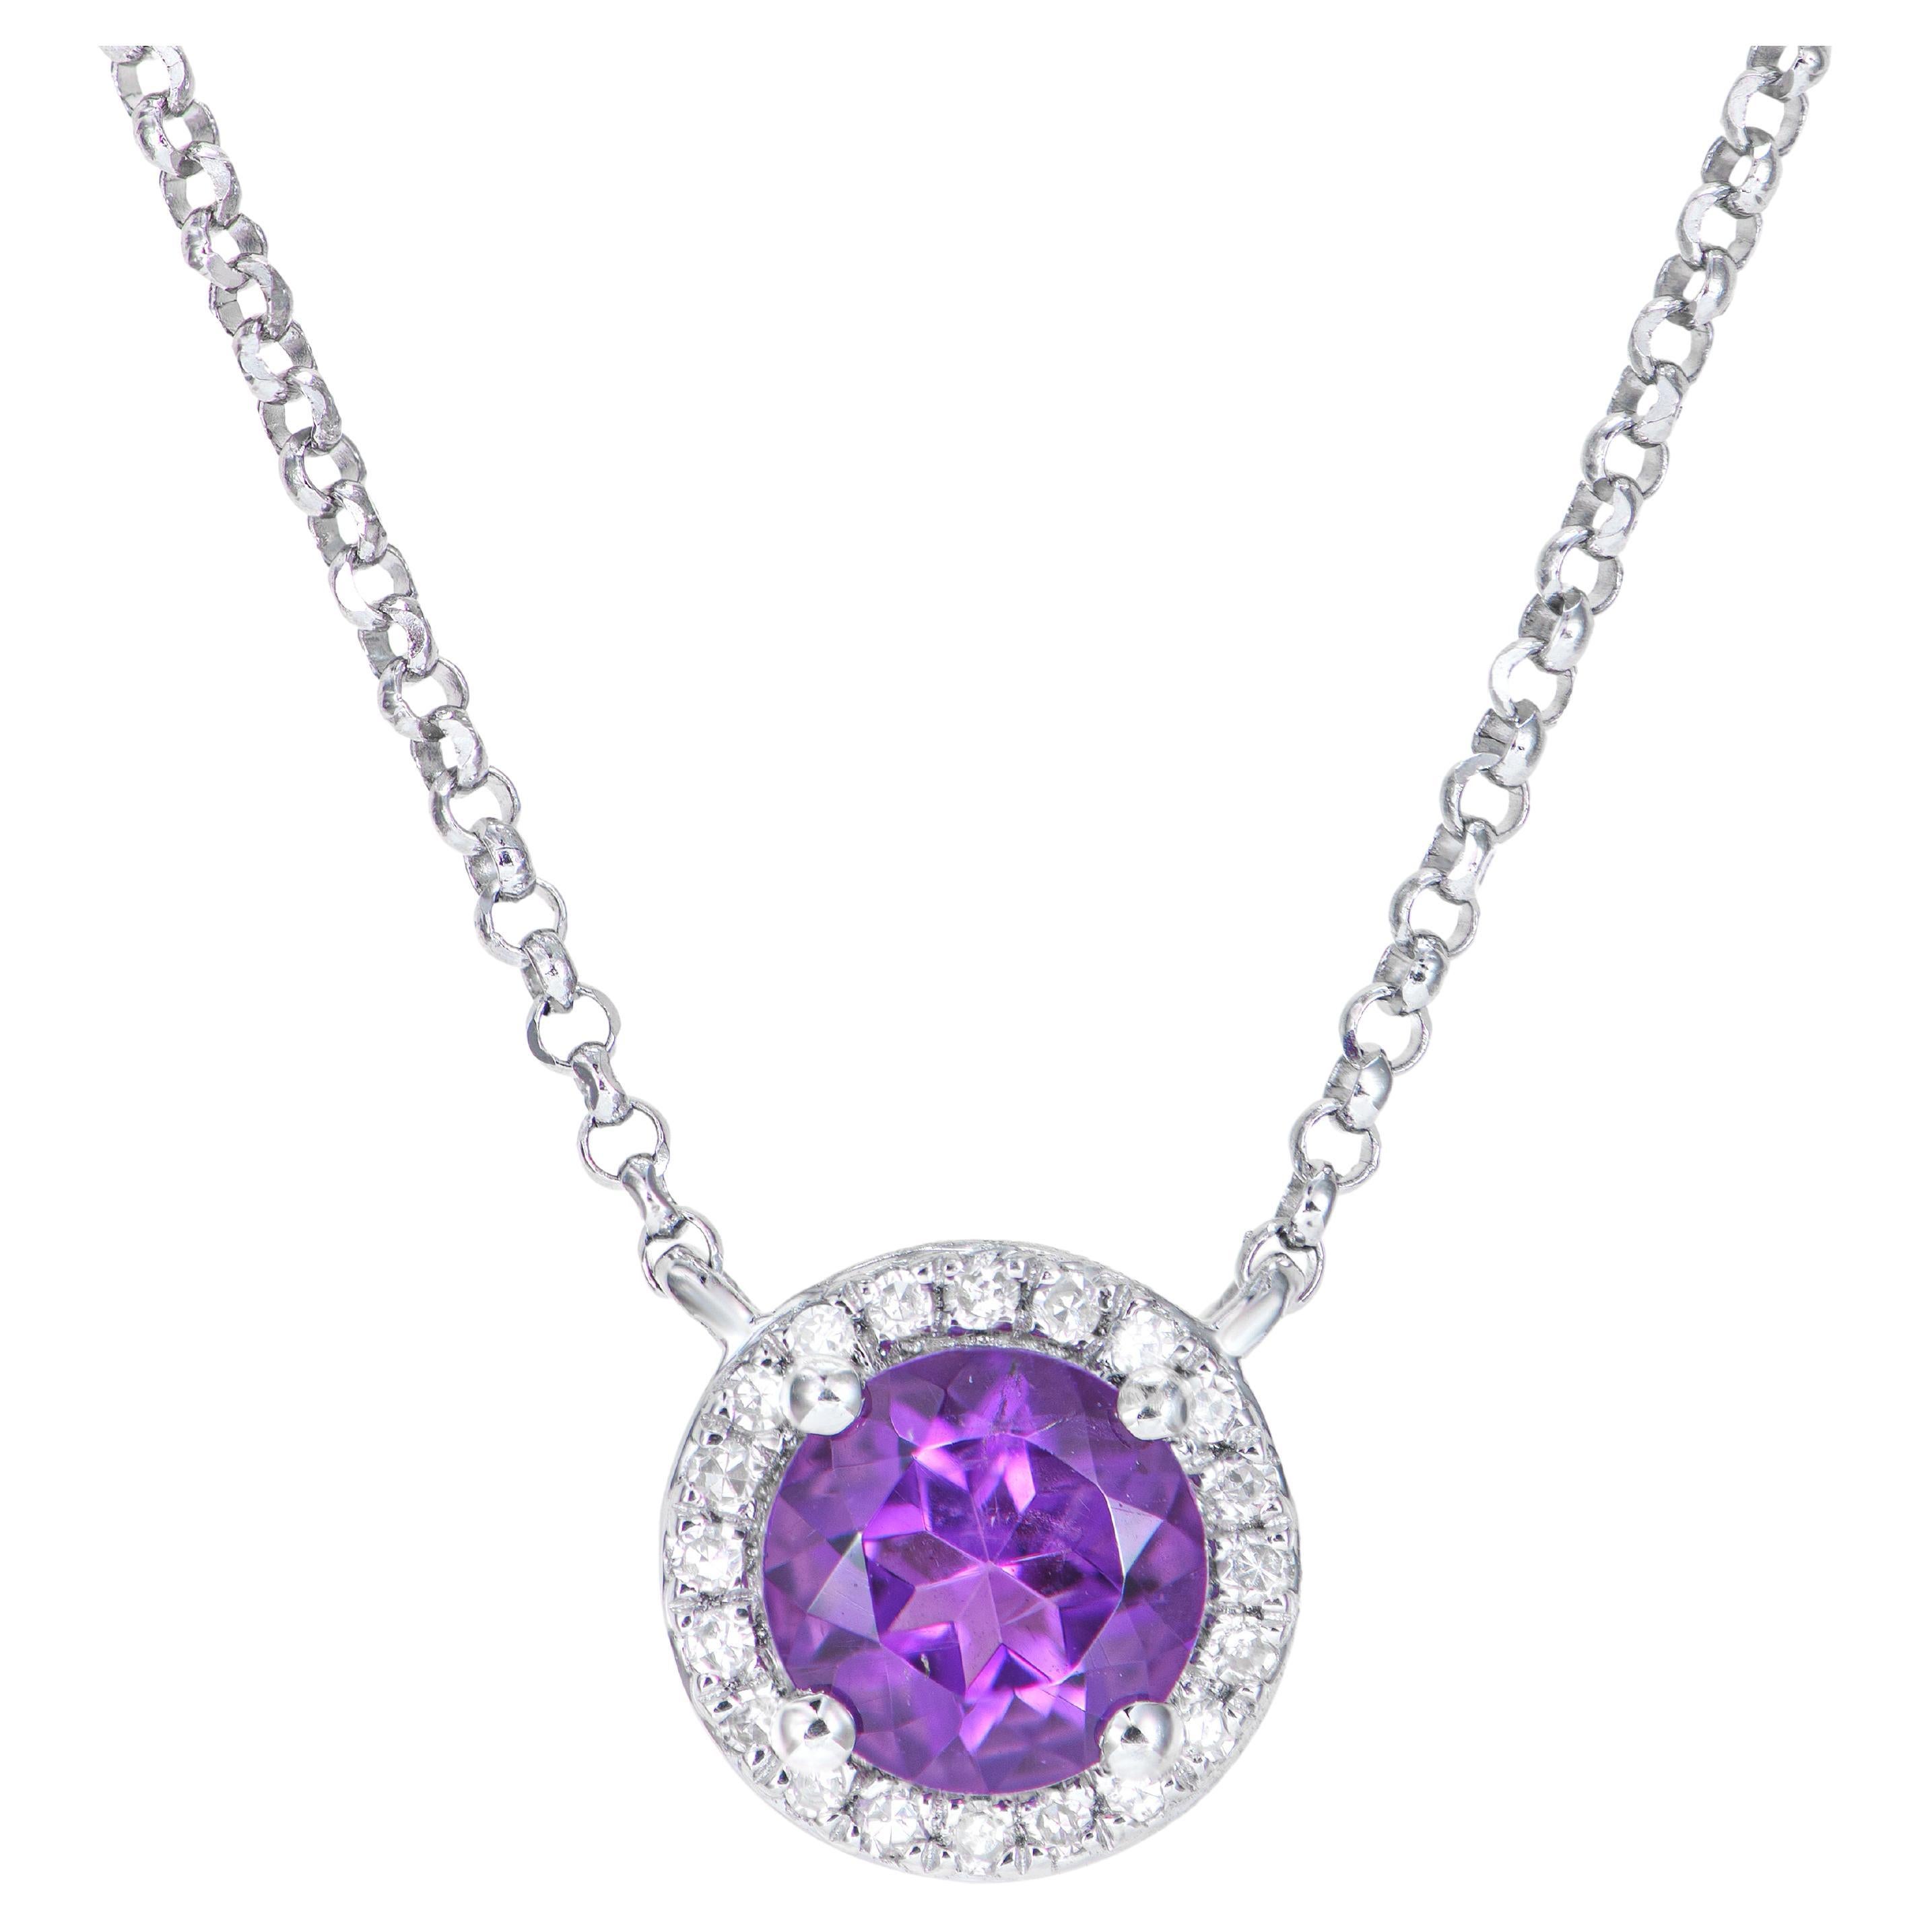 0.40 Carat Amethyst Pendant in 18Karat White Gold with White Diamond. For Sale